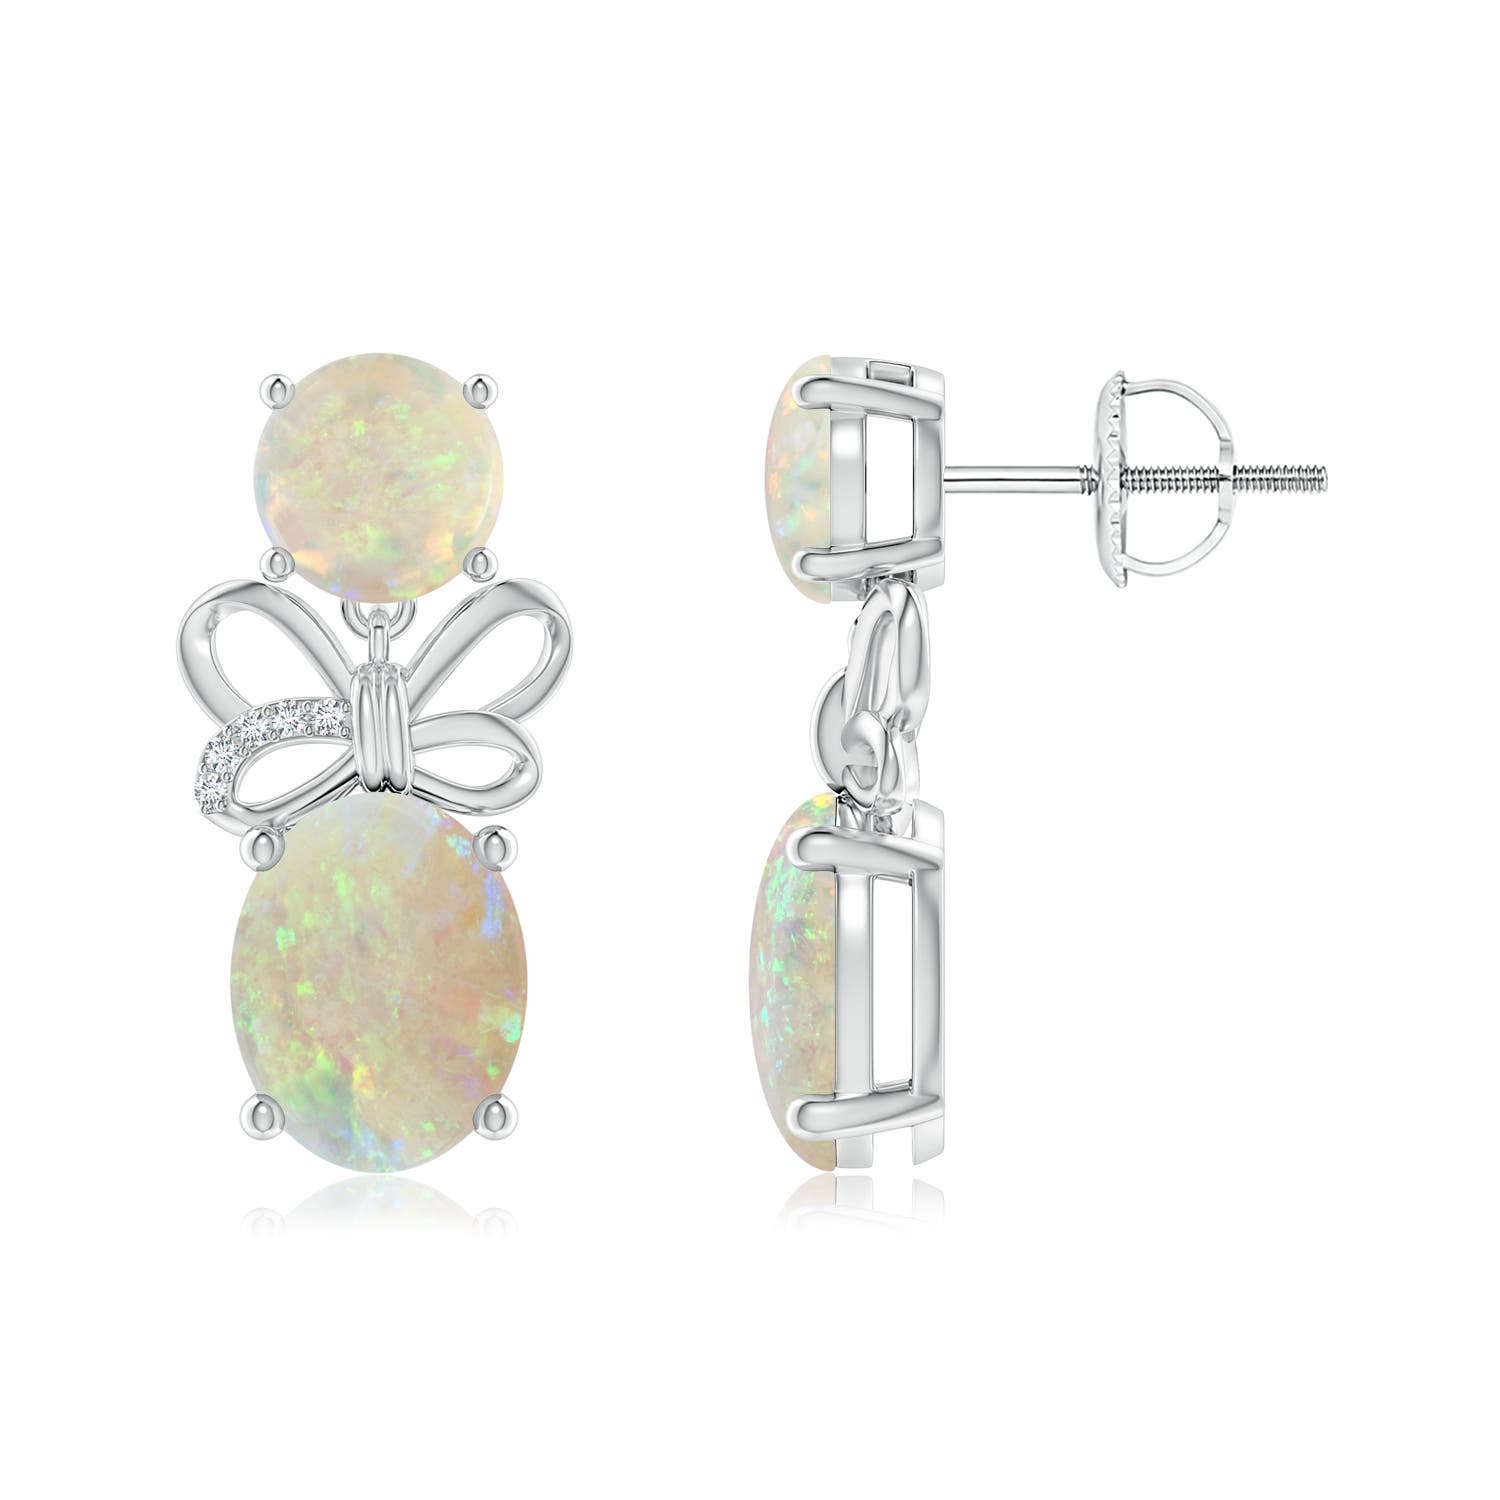 AAA - Opal / 3.24 CT / 14 KT White Gold